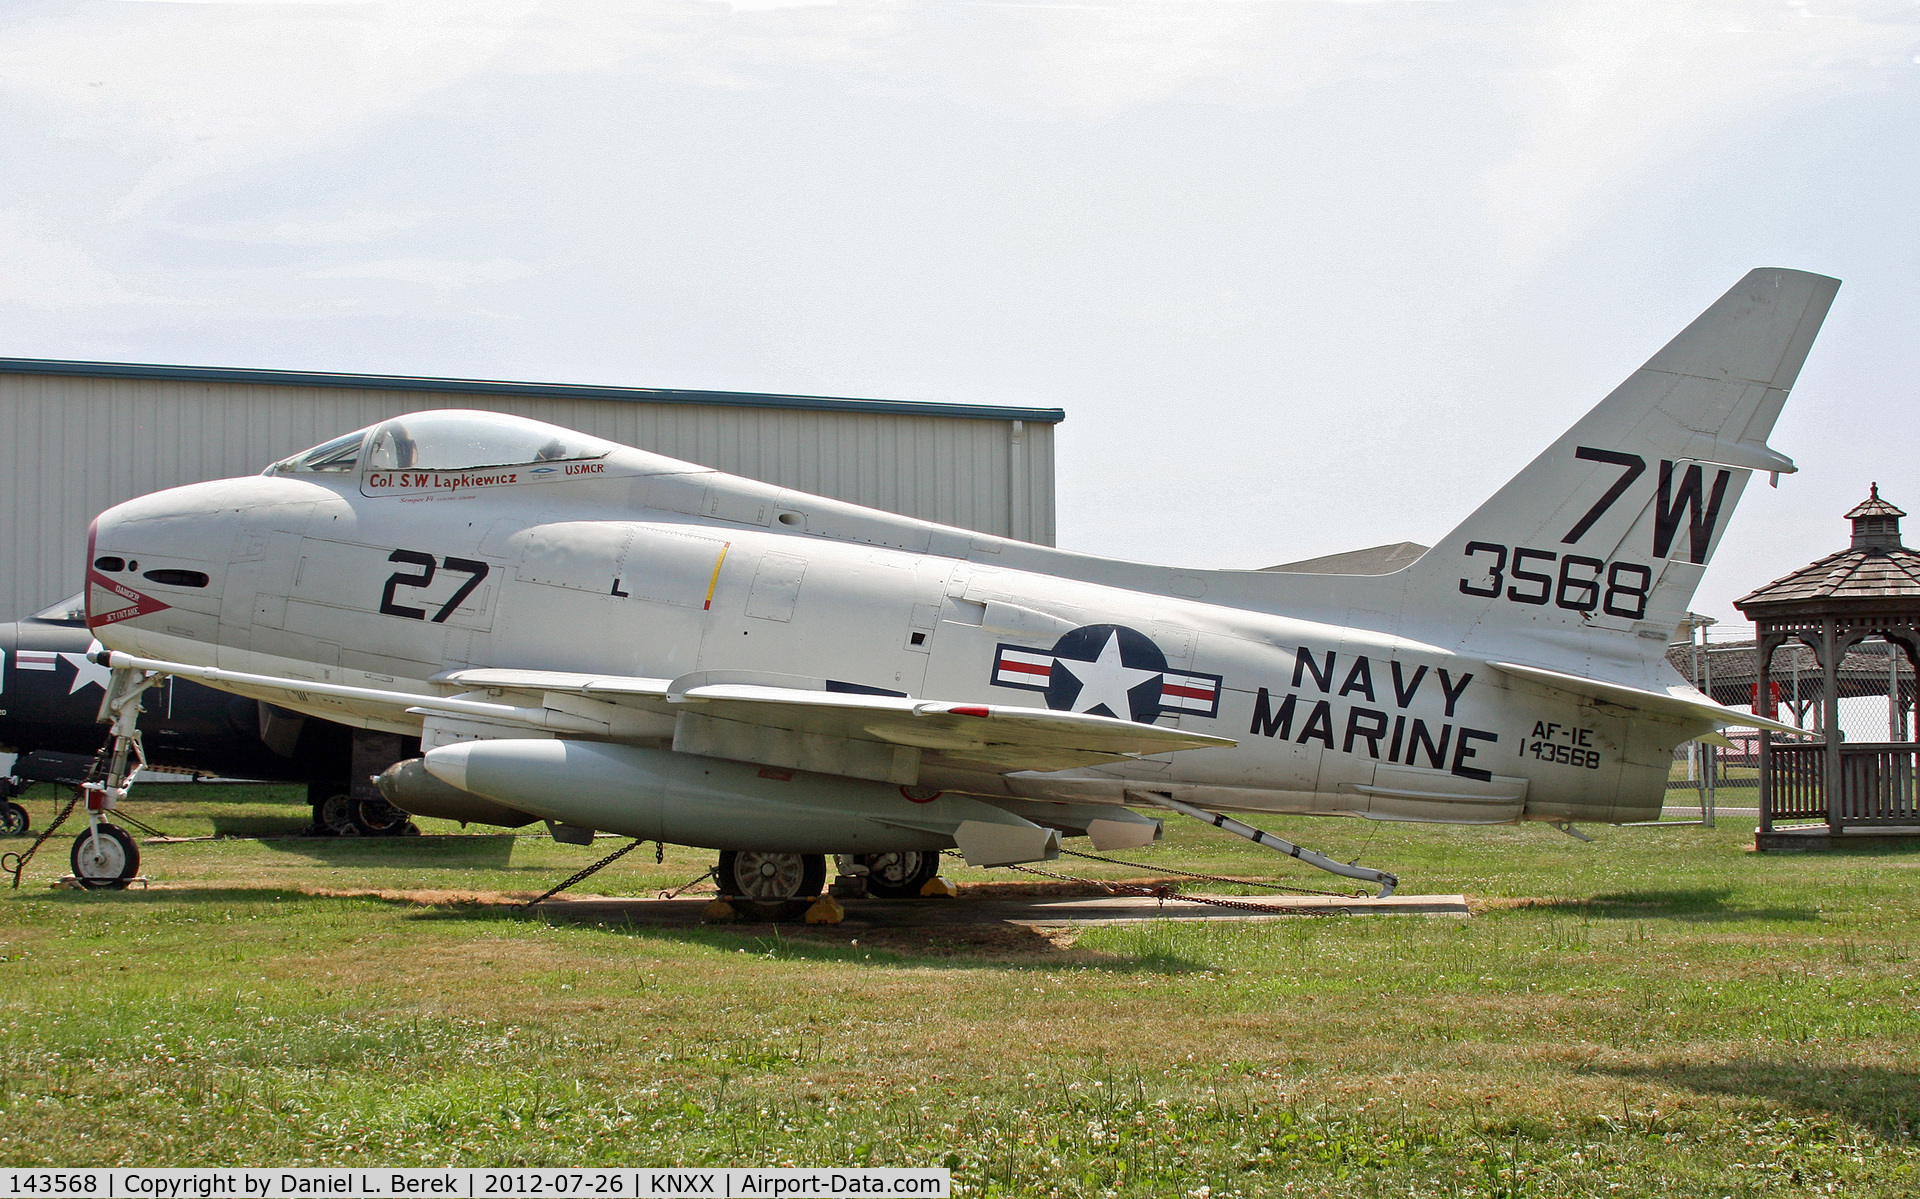 143568, North American AF-1E Fury C/N 204-76, This fine aircraft is a proud part of the Delaware Valley Historical Aircraft Association's Wings of Freedom Museum.